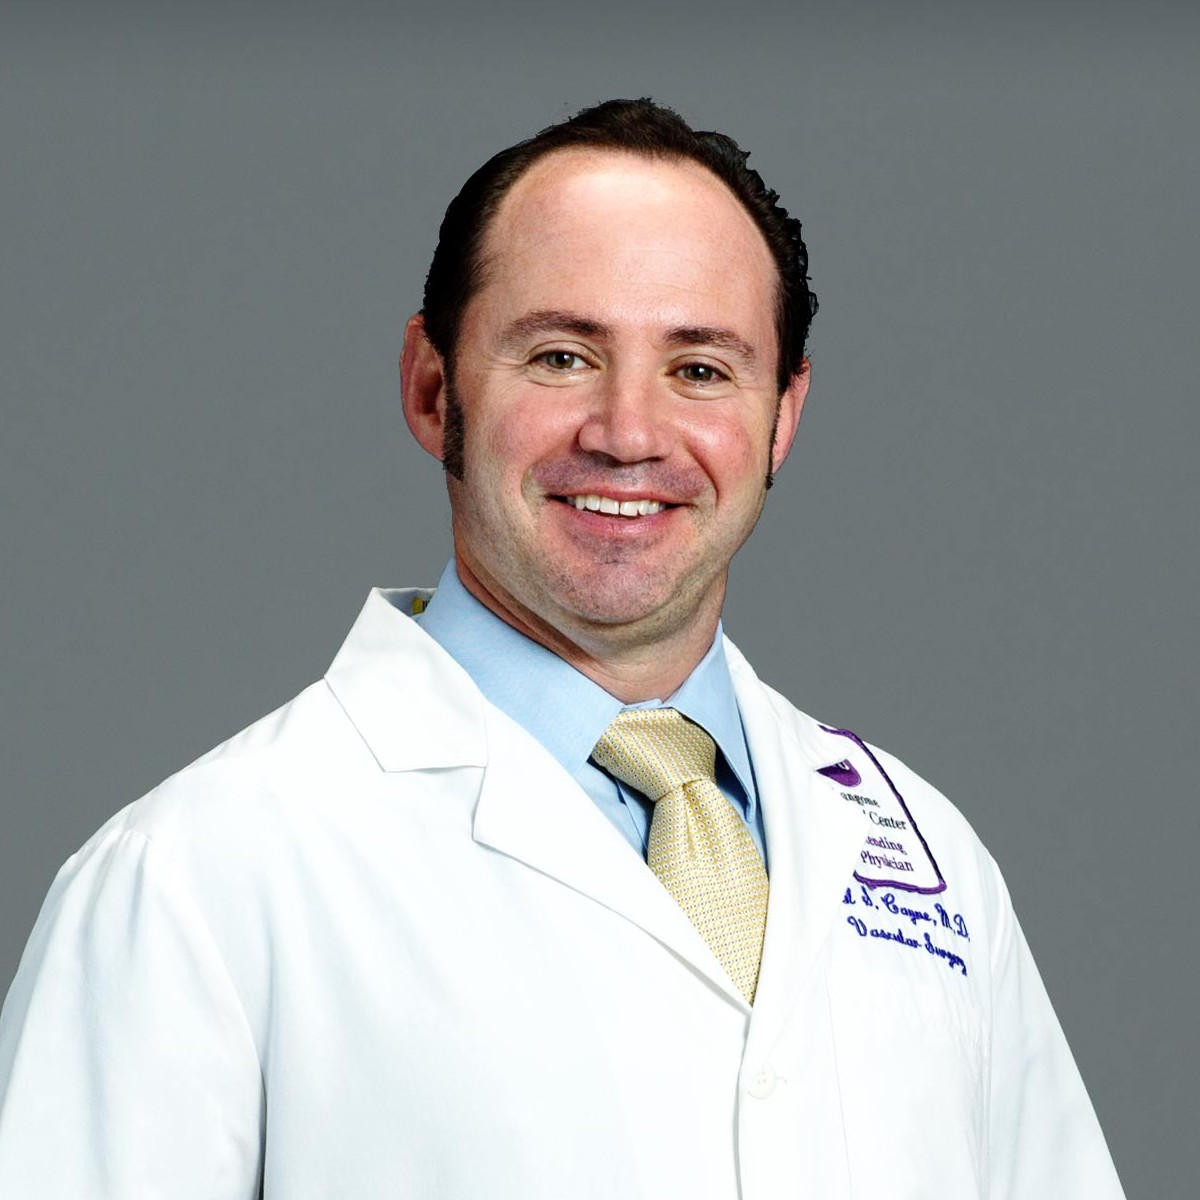 Neal S. Cayne, MD